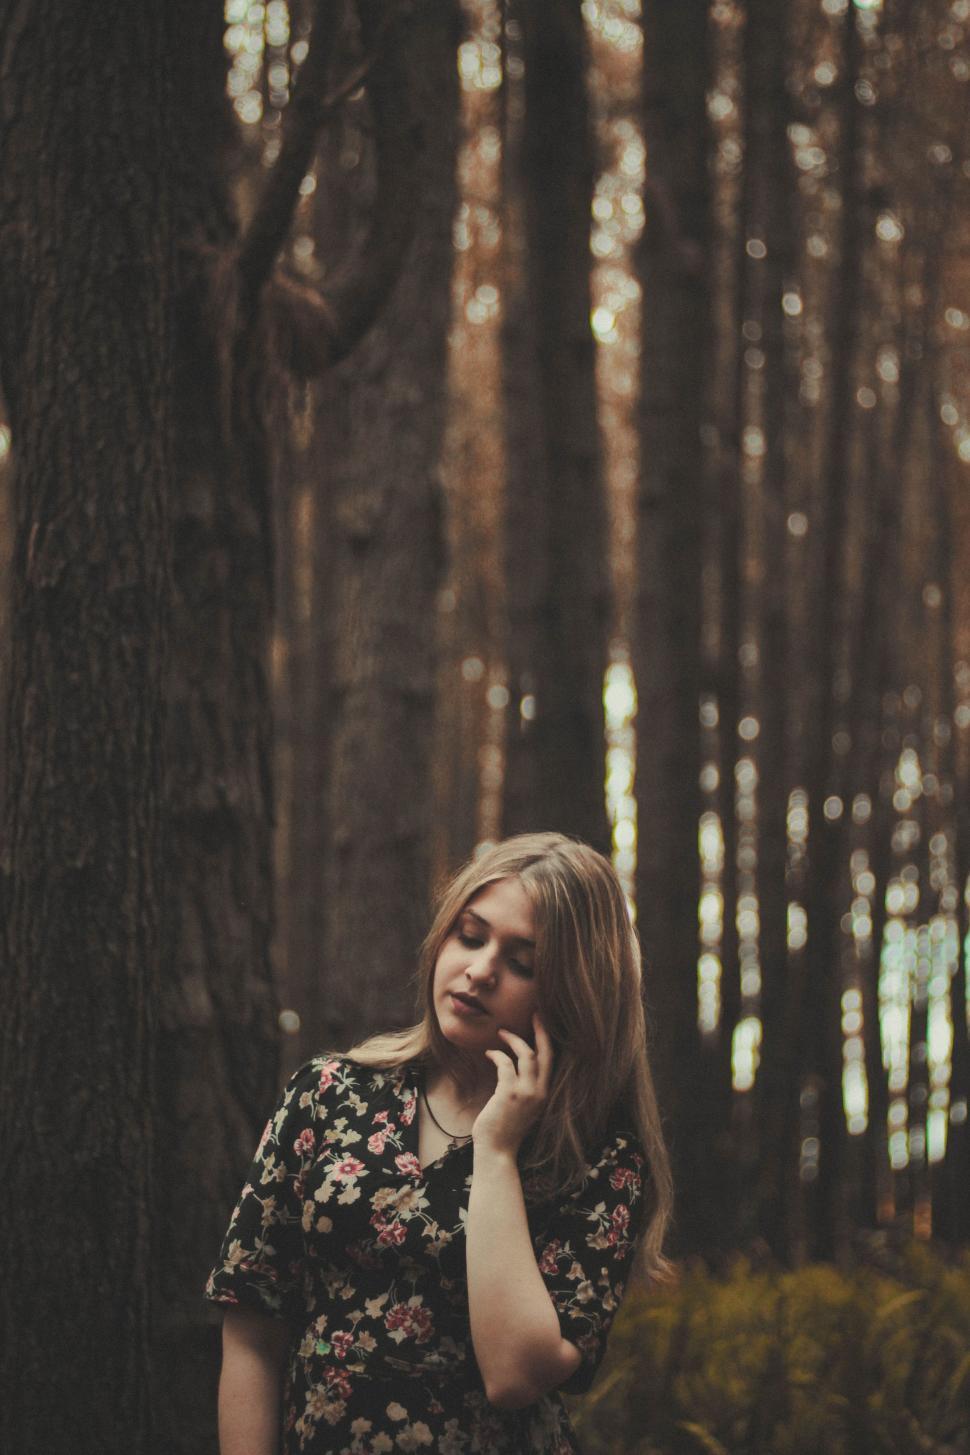 Free Image of Woman Standing in Forest Talking on Cell Phone 